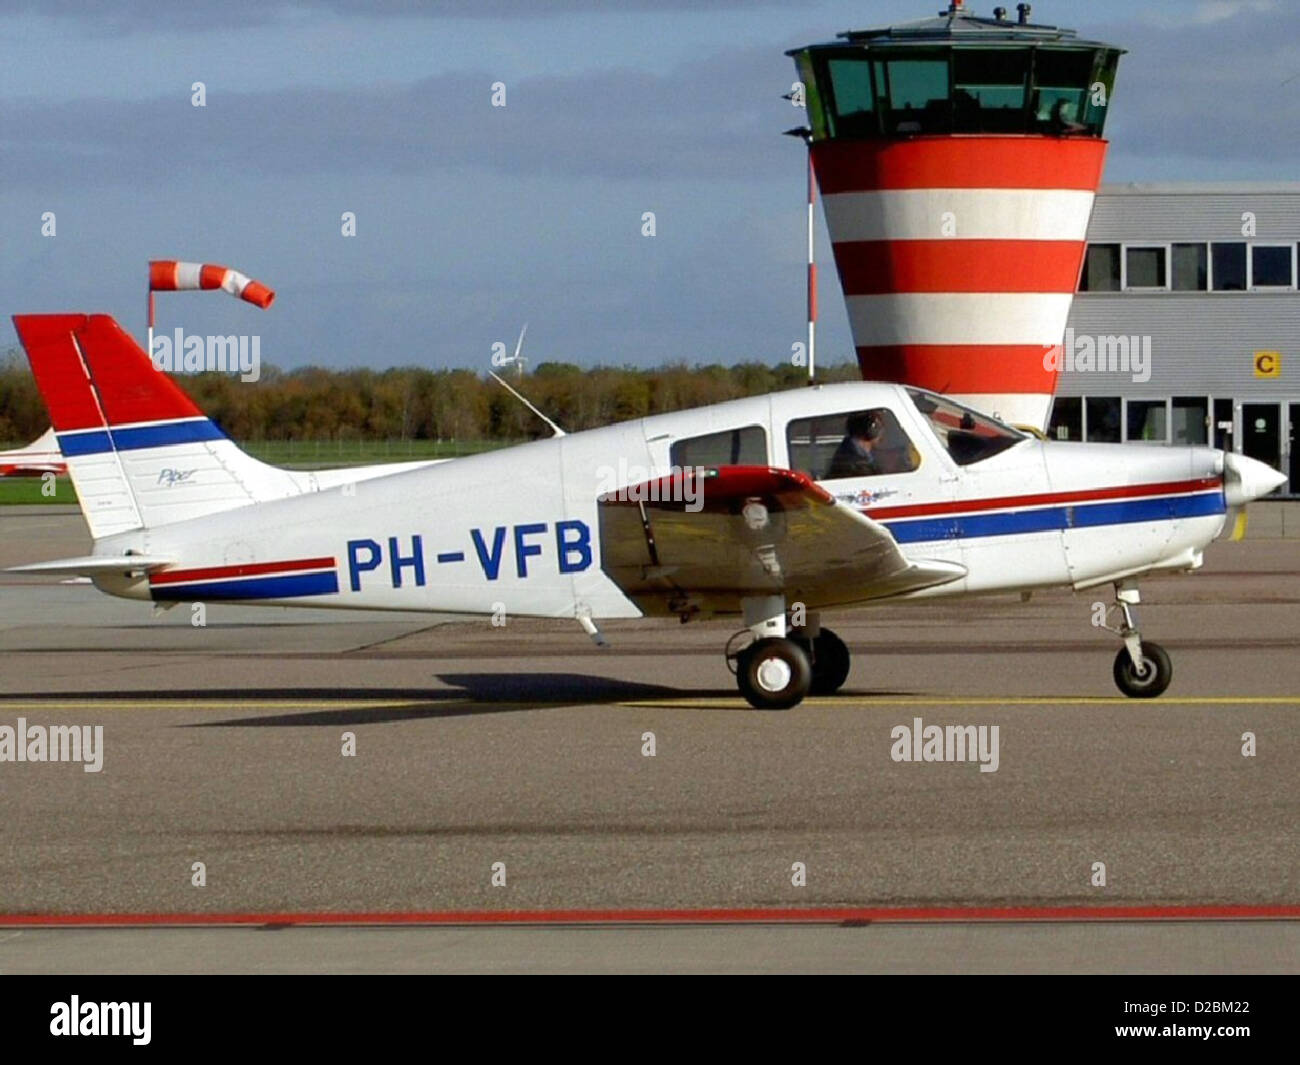 Piper PA-28-161 PH-VFB Lelystad (Ley - EHLE) Banque D'Images